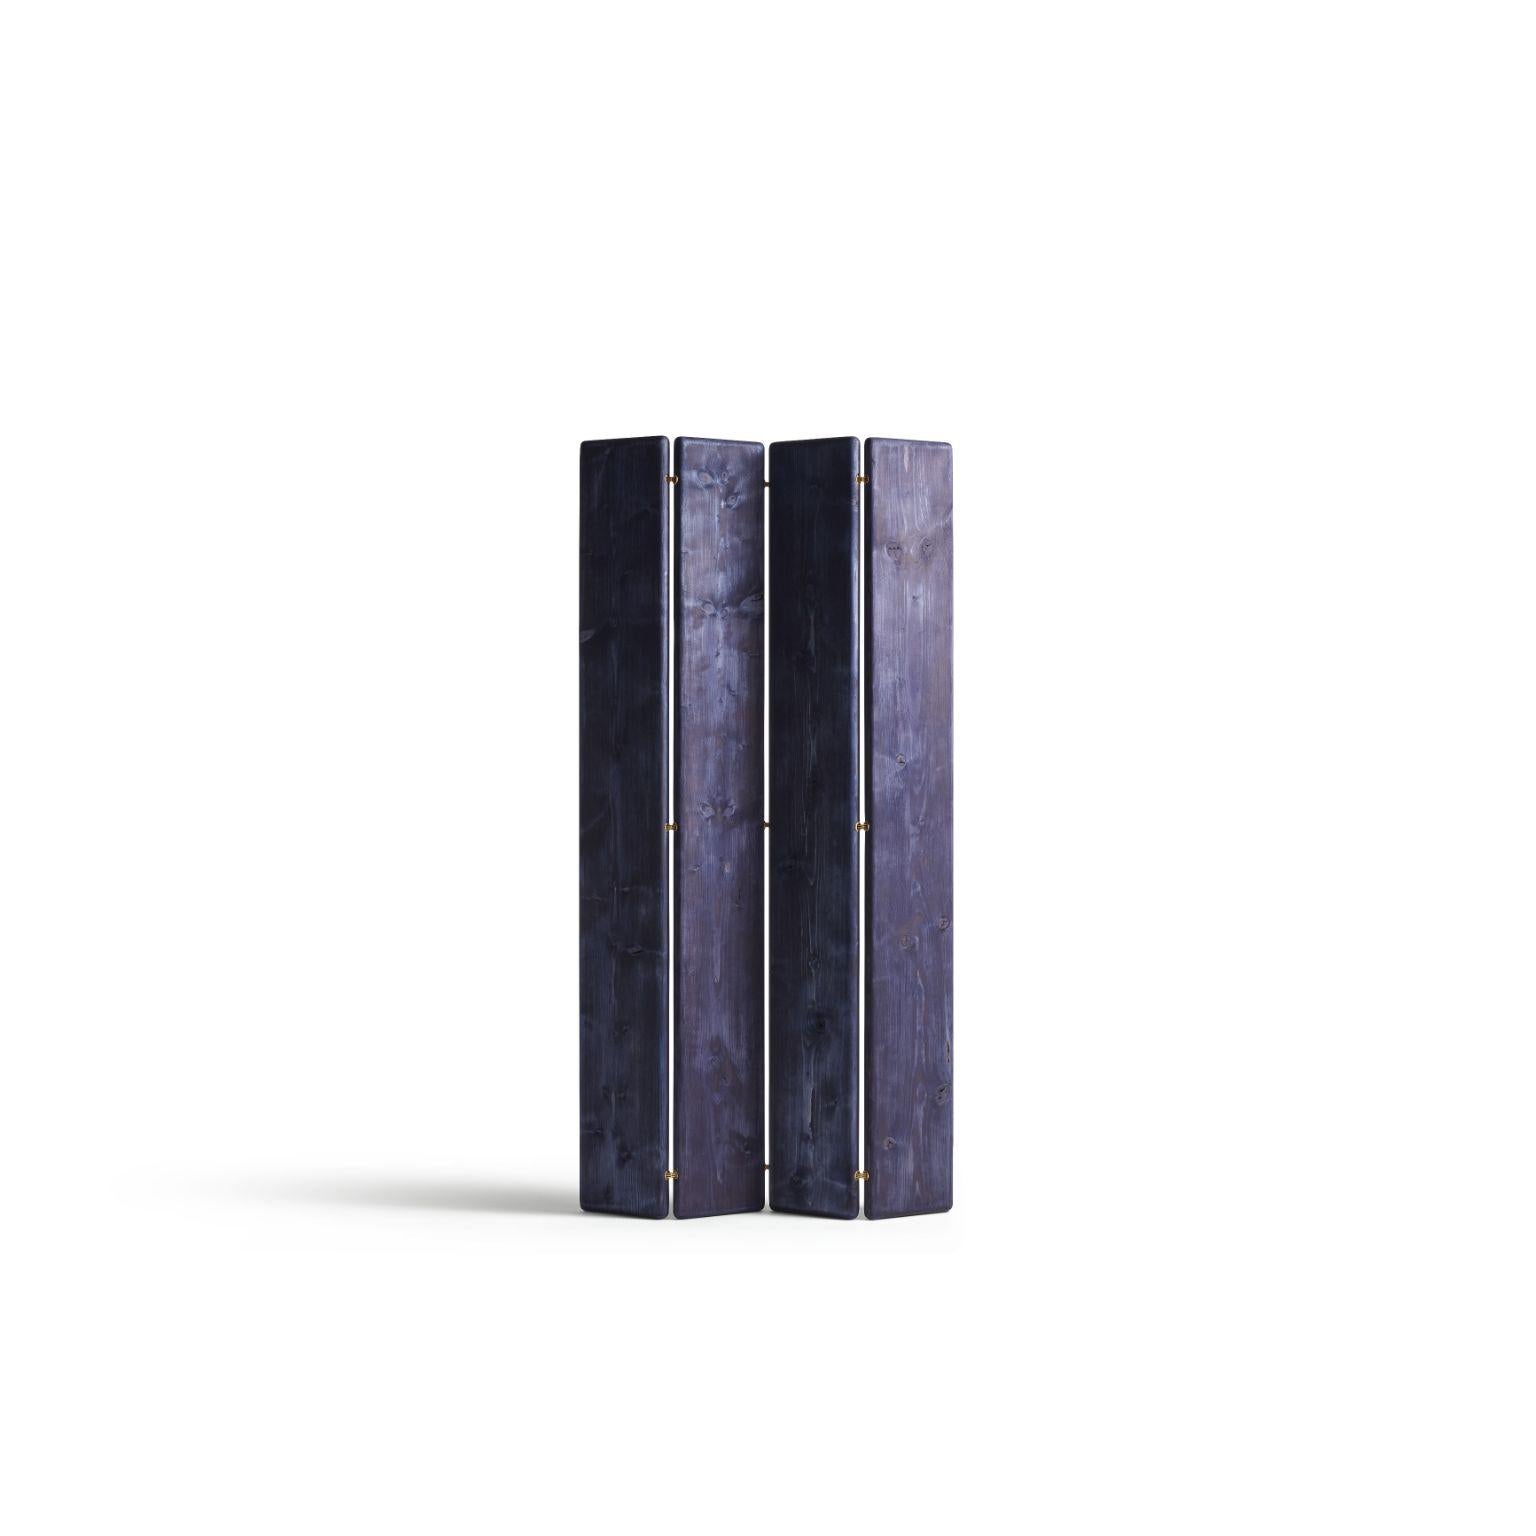 Timber Roomdivider by Onno Adriaanse
Signed and numbered
Dimensions: D 80x W 20 x H 180 cm.
Materials: stained pine wood, clear satin coating, brass hinges
Also available in Color: Indigo blue, purple-red, uncolored wood. More colors on request.